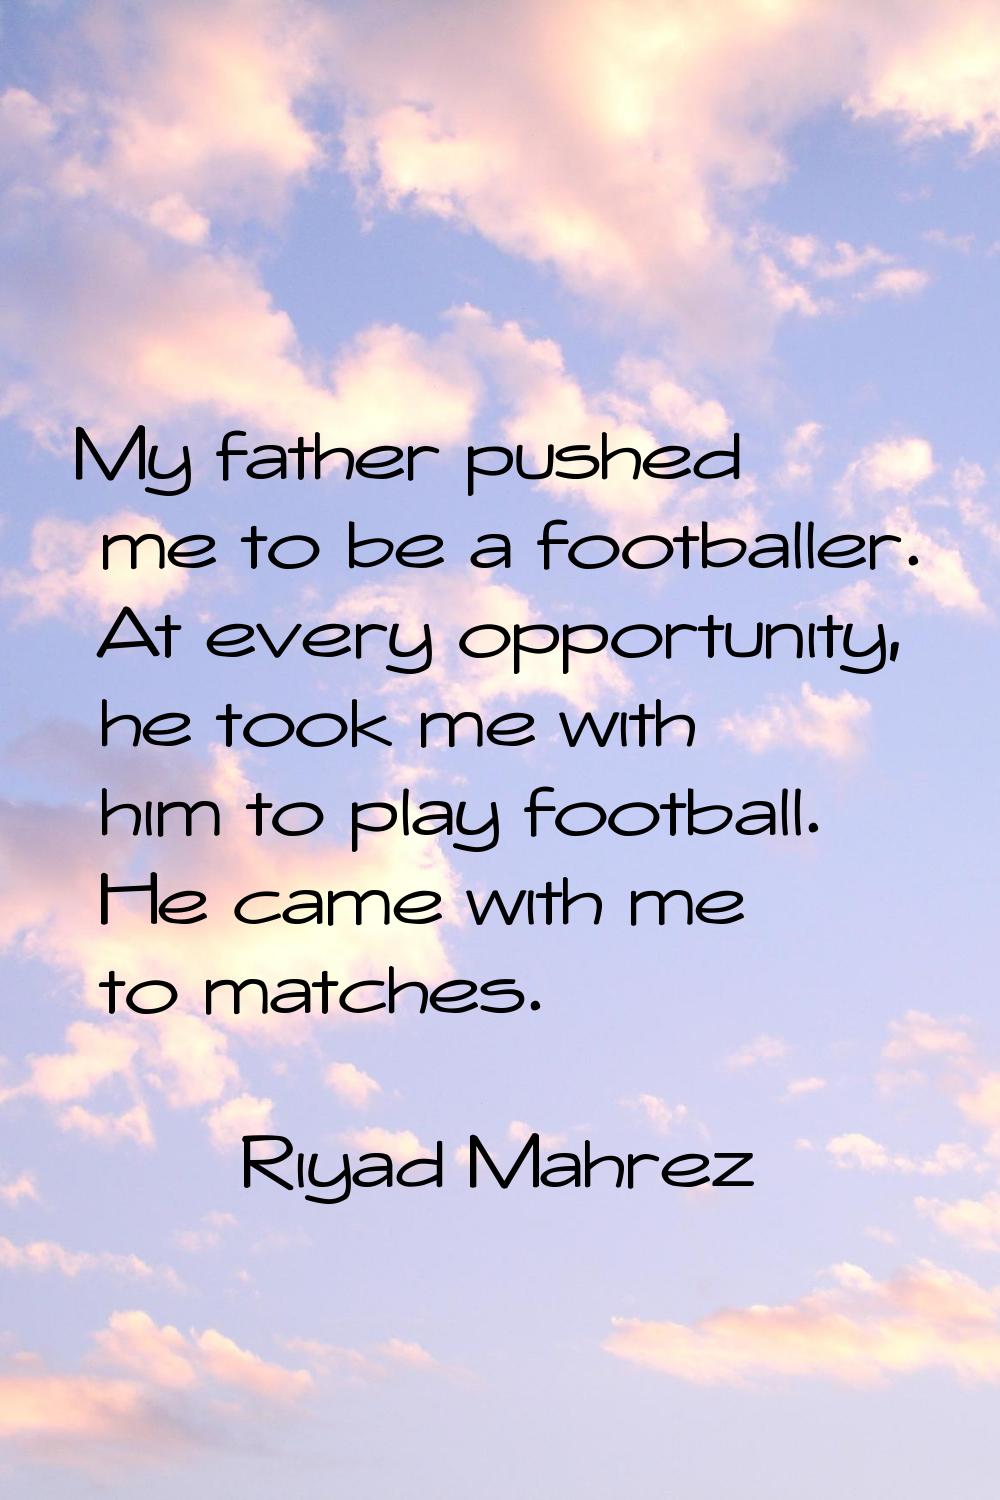 My father pushed me to be a footballer. At every opportunity, he took me with him to play football.